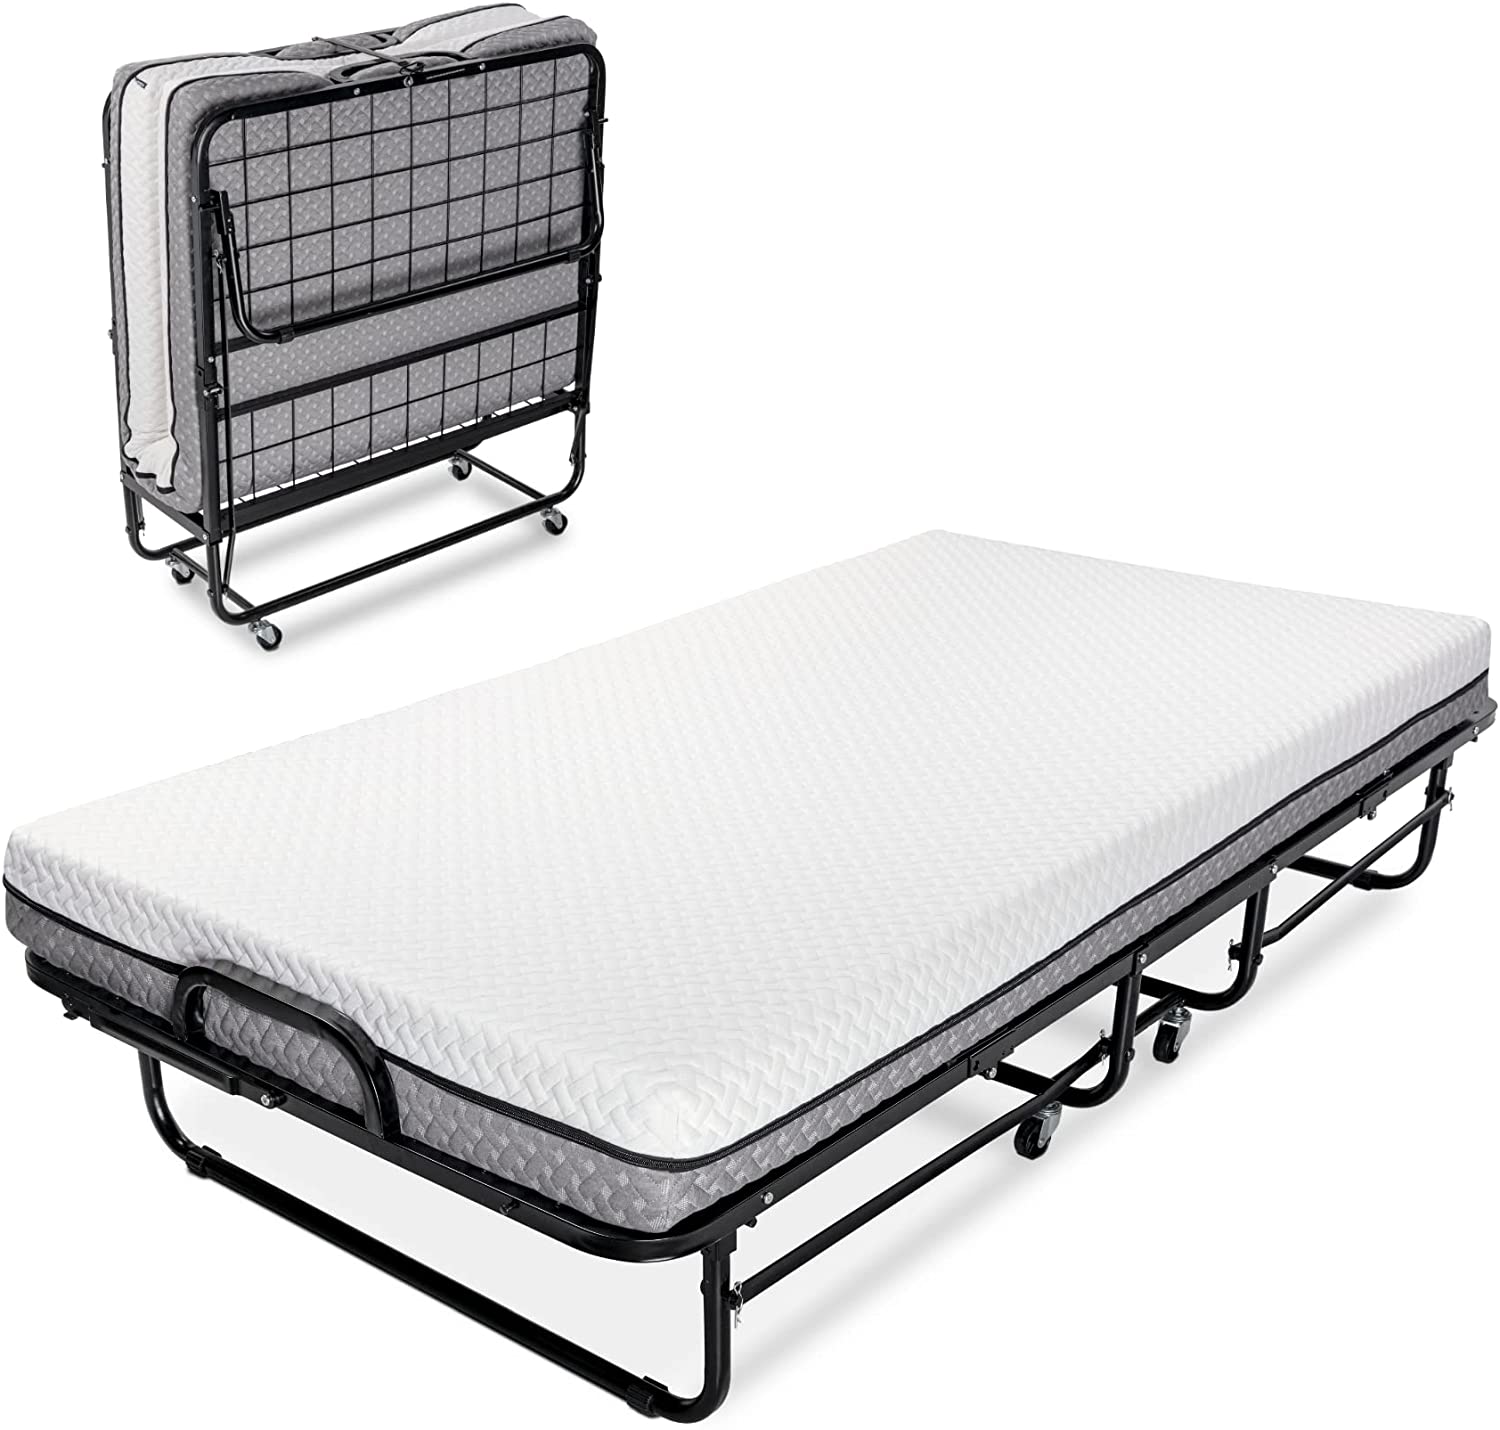 Milliard Deluxe Diplomat Folding Bed – Twin Size - with Luxurious Memory Foam Mattress and a Super Strong Sturdy Frame – 75” x 38 - Airbnb Ambassador